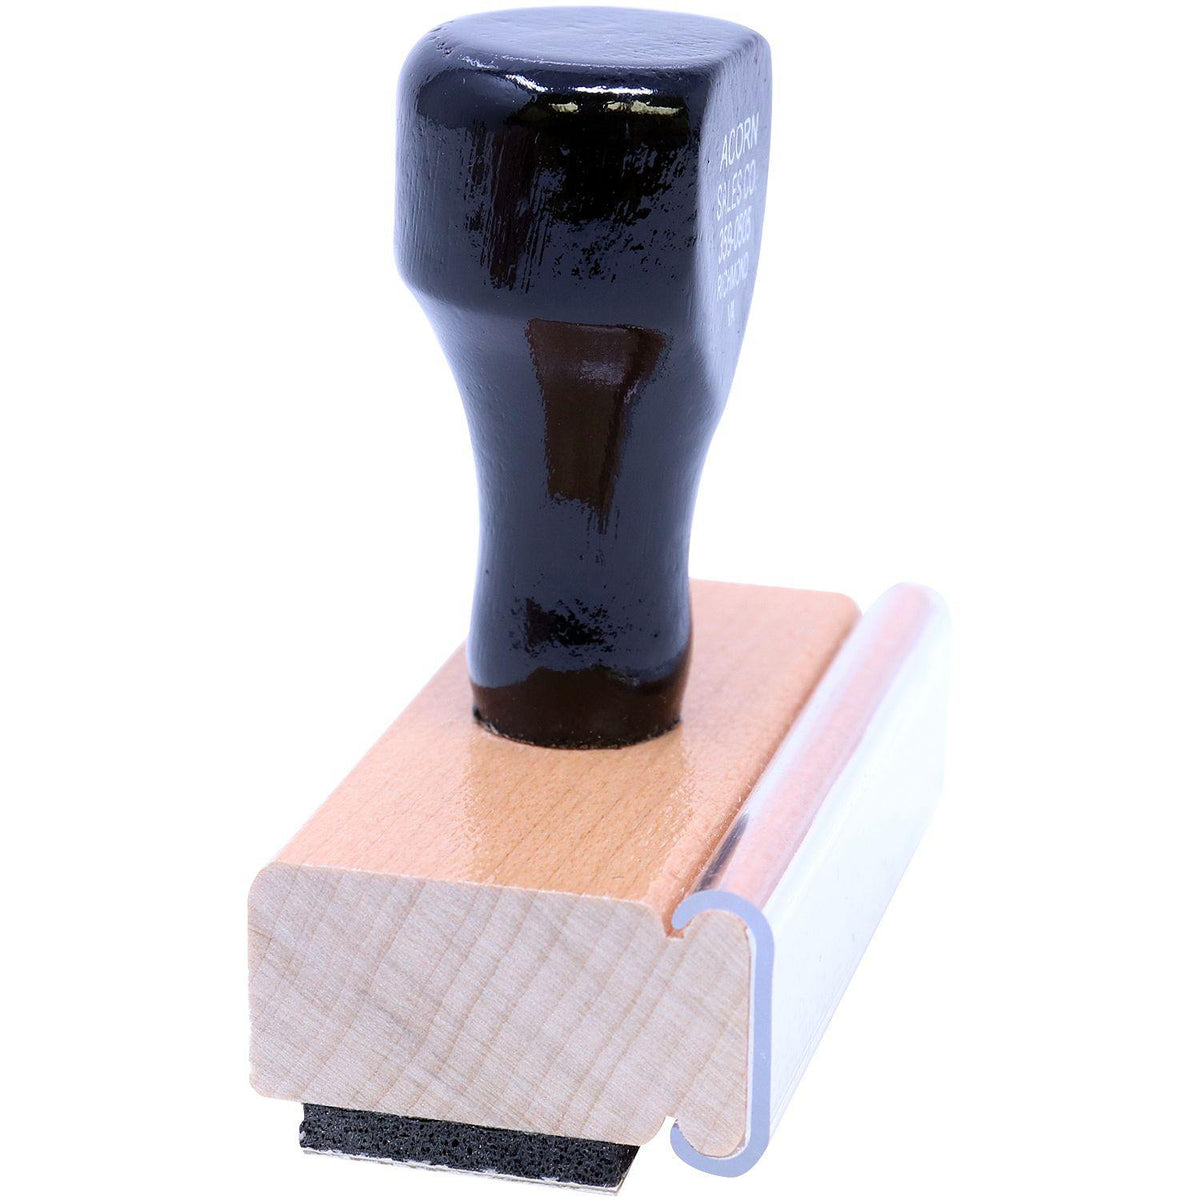 Side View of Entered Rubber Stamp at an Angle